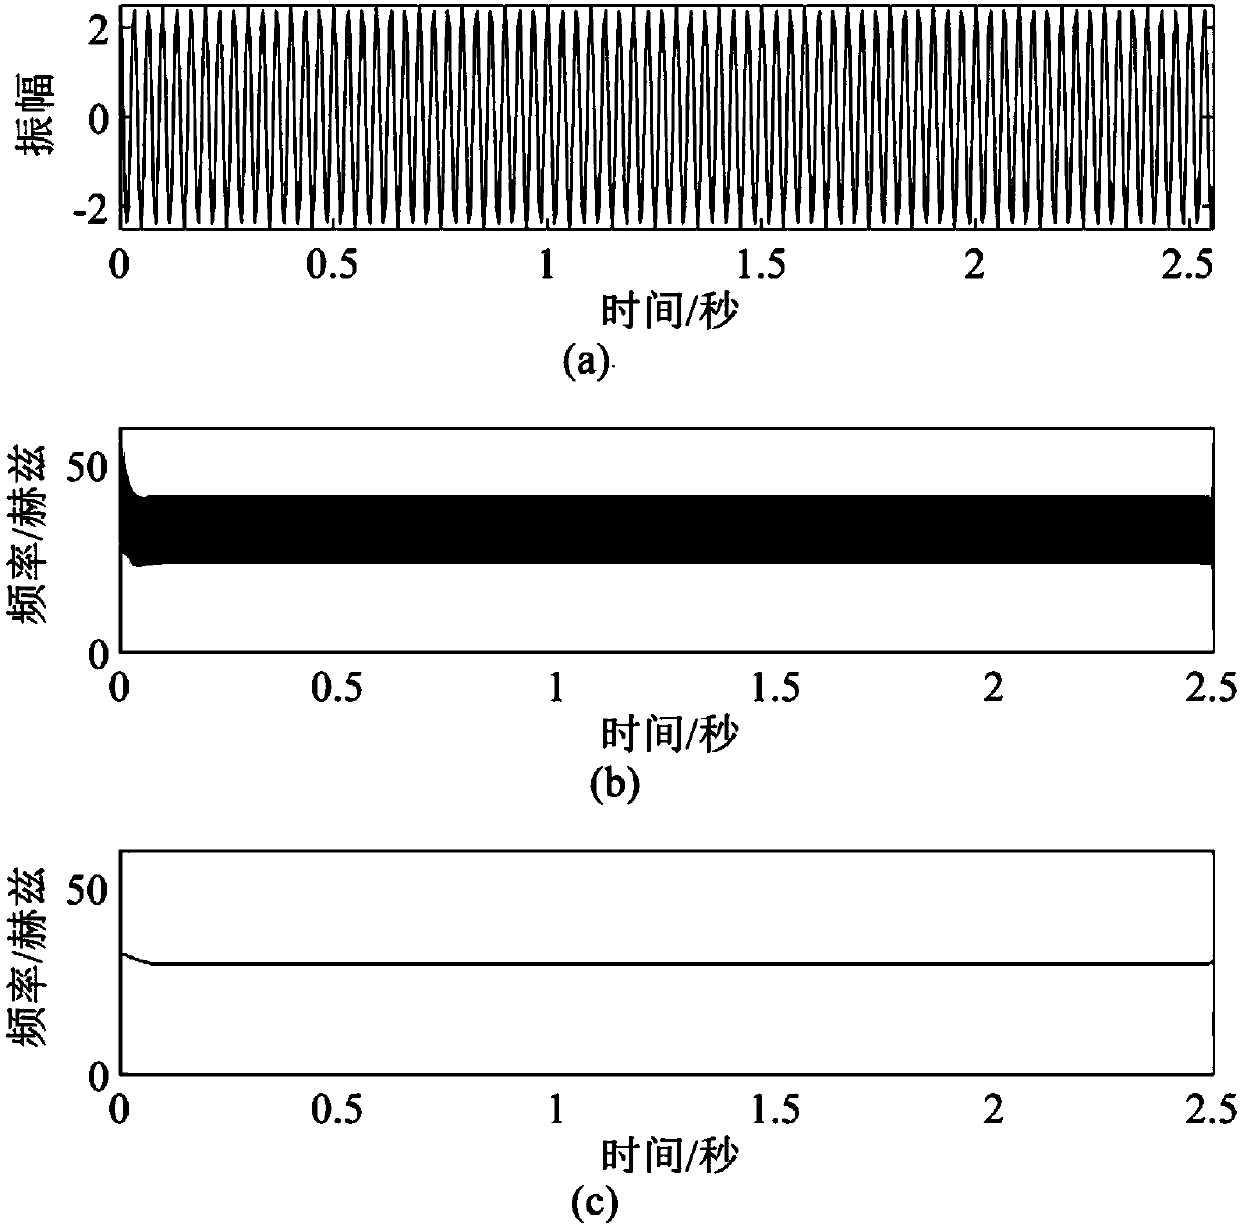 Seismic data time frequency analysis method based on synchronization extraction S transformation